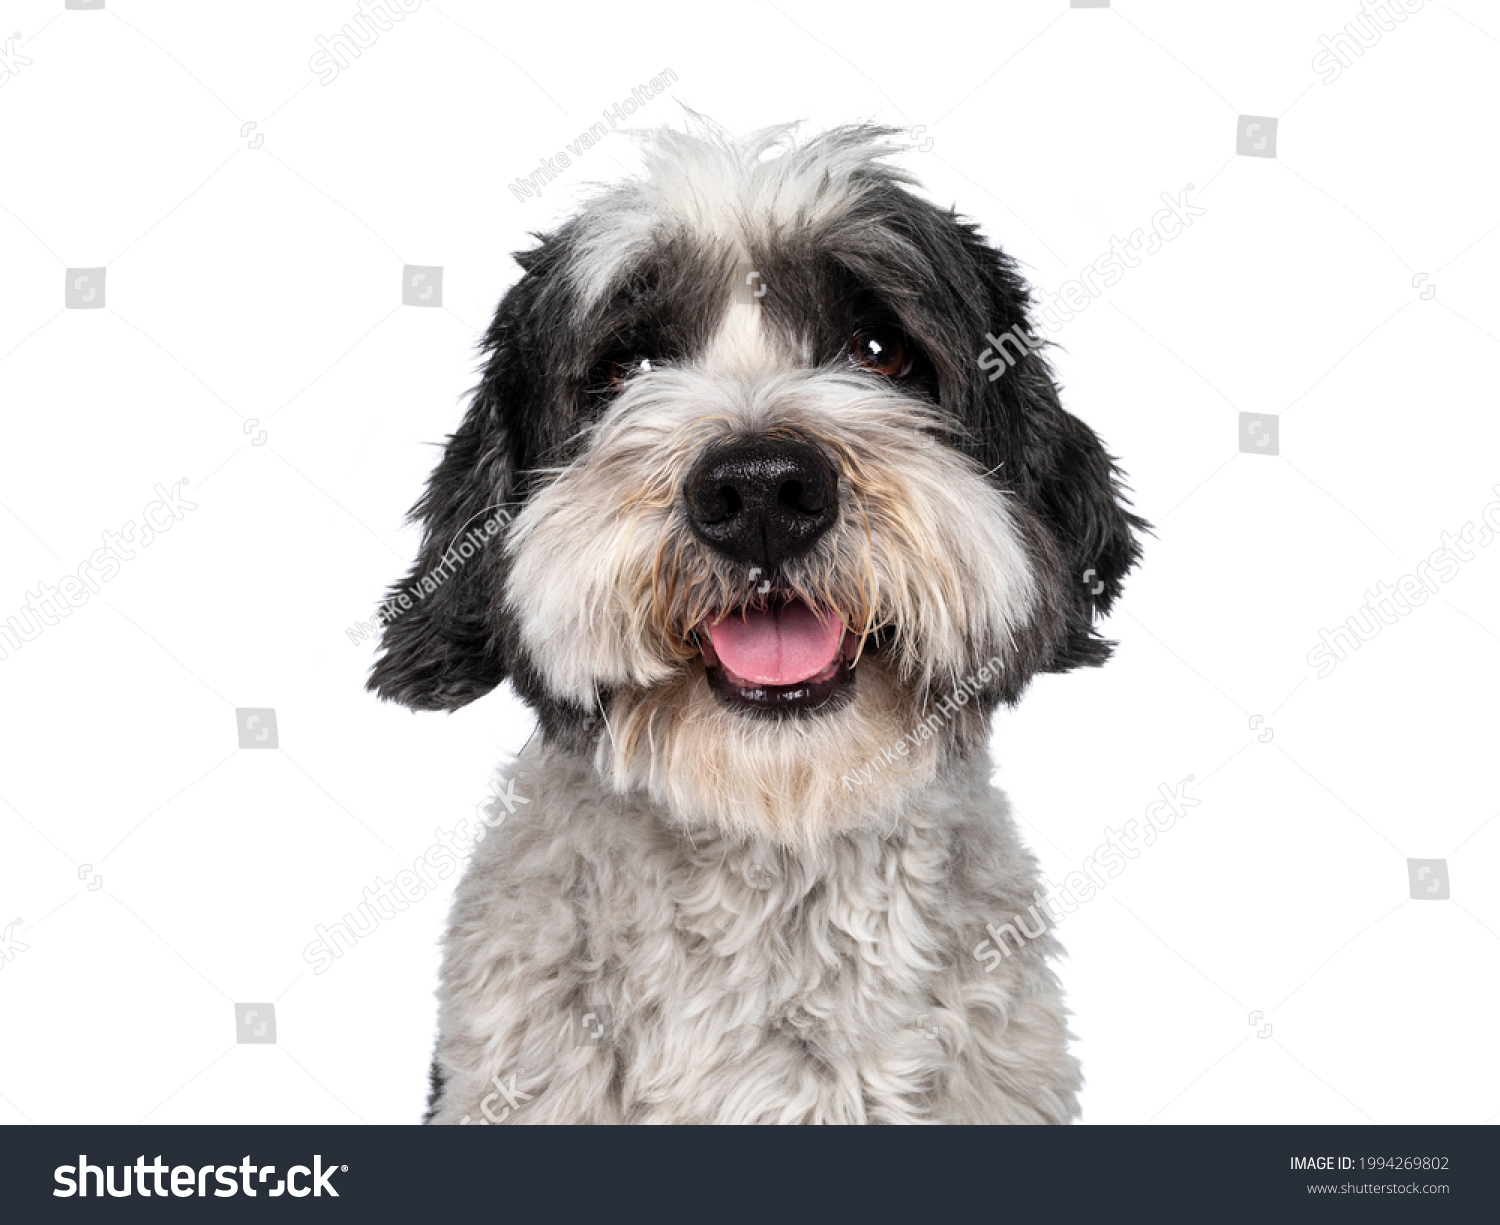 Head shot of cute little mixed breed Boomer dog, sitting up facing front. Looking straight to camera with friendly brown eyes. Isolated on white background. Mouth slightly open, showing tongue, #1994269802